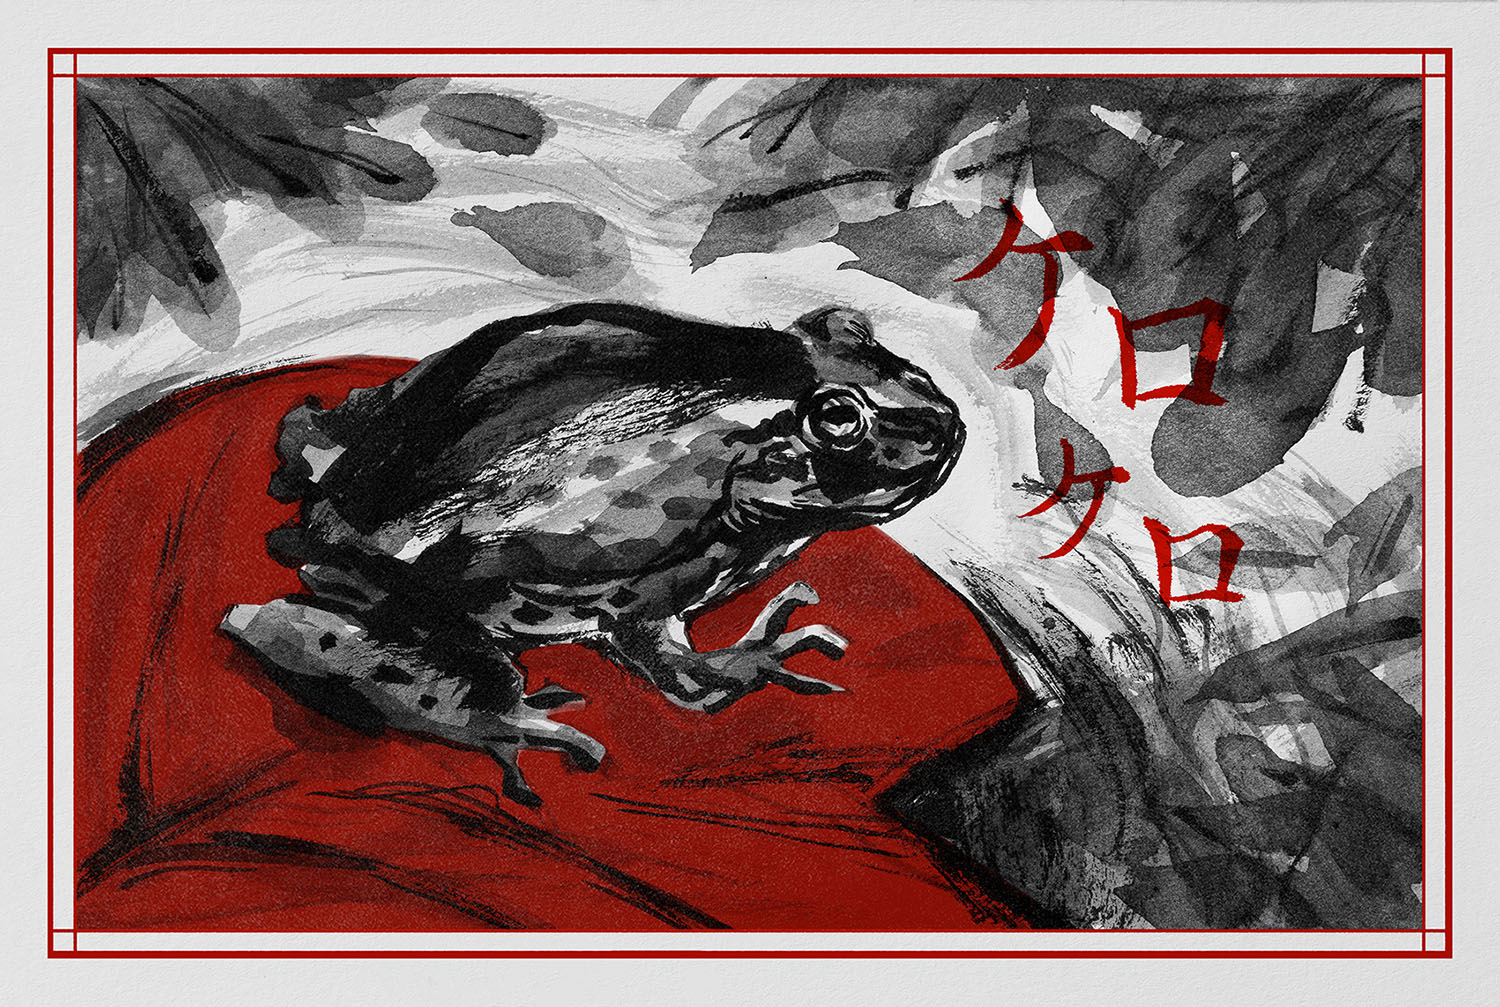 An image of a frog painted in ink from Allan Xia's work Yoru no Torii